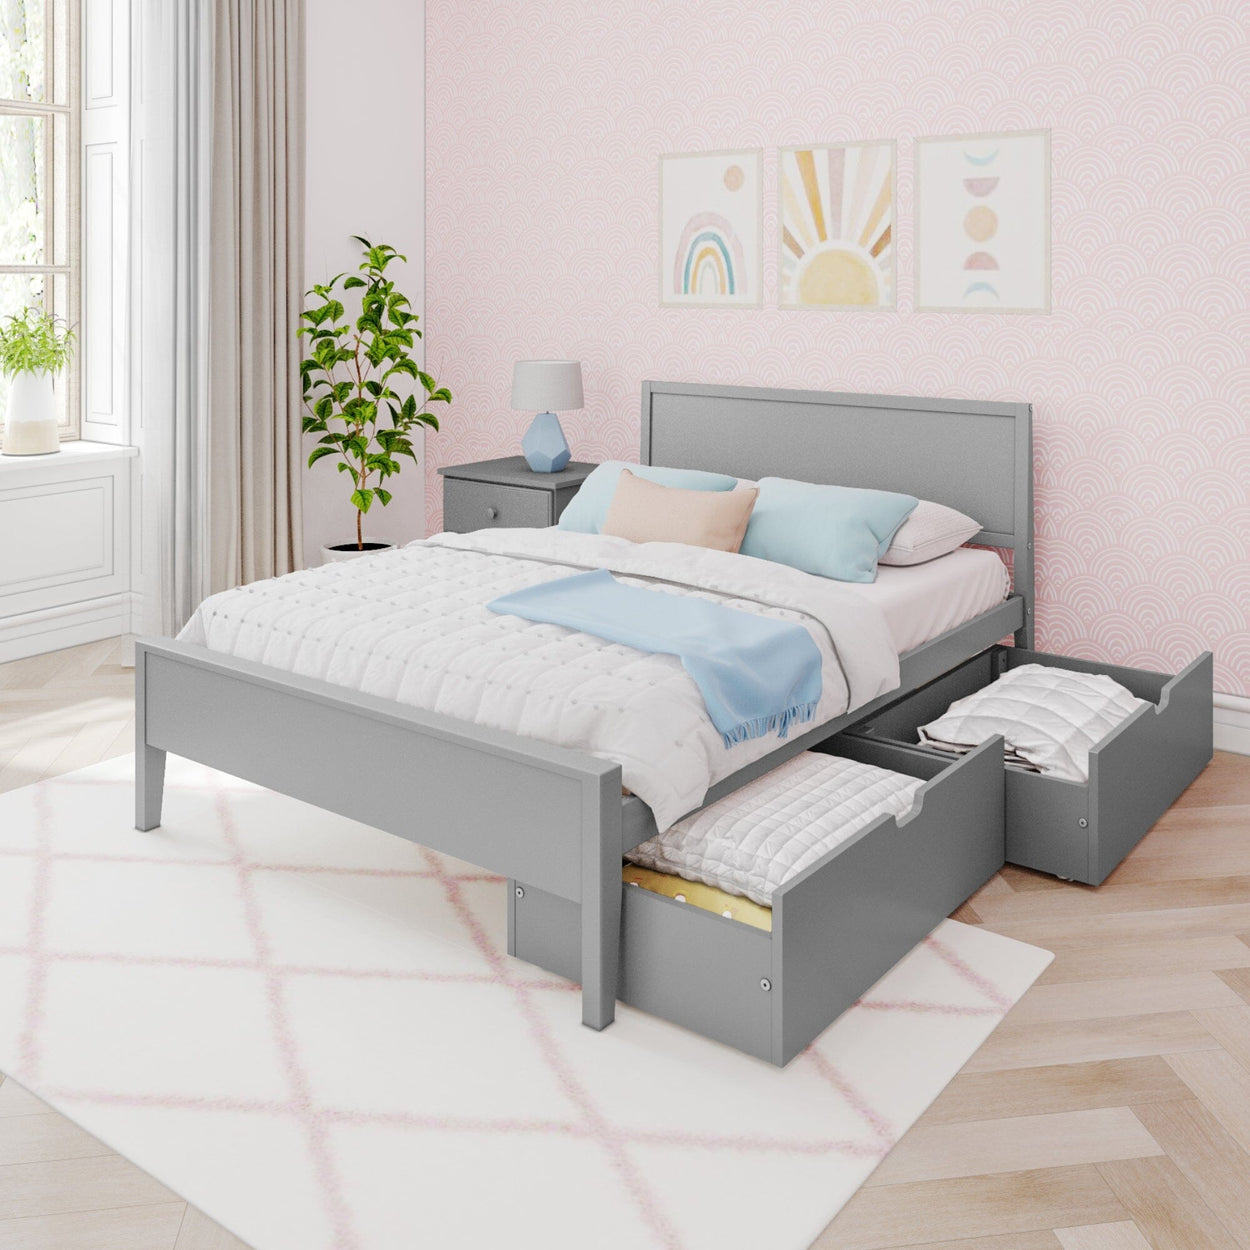 187101-121 : Kids Beds Classic Full-Size Bed with Panel Headboard and Storage Drawers, Grey